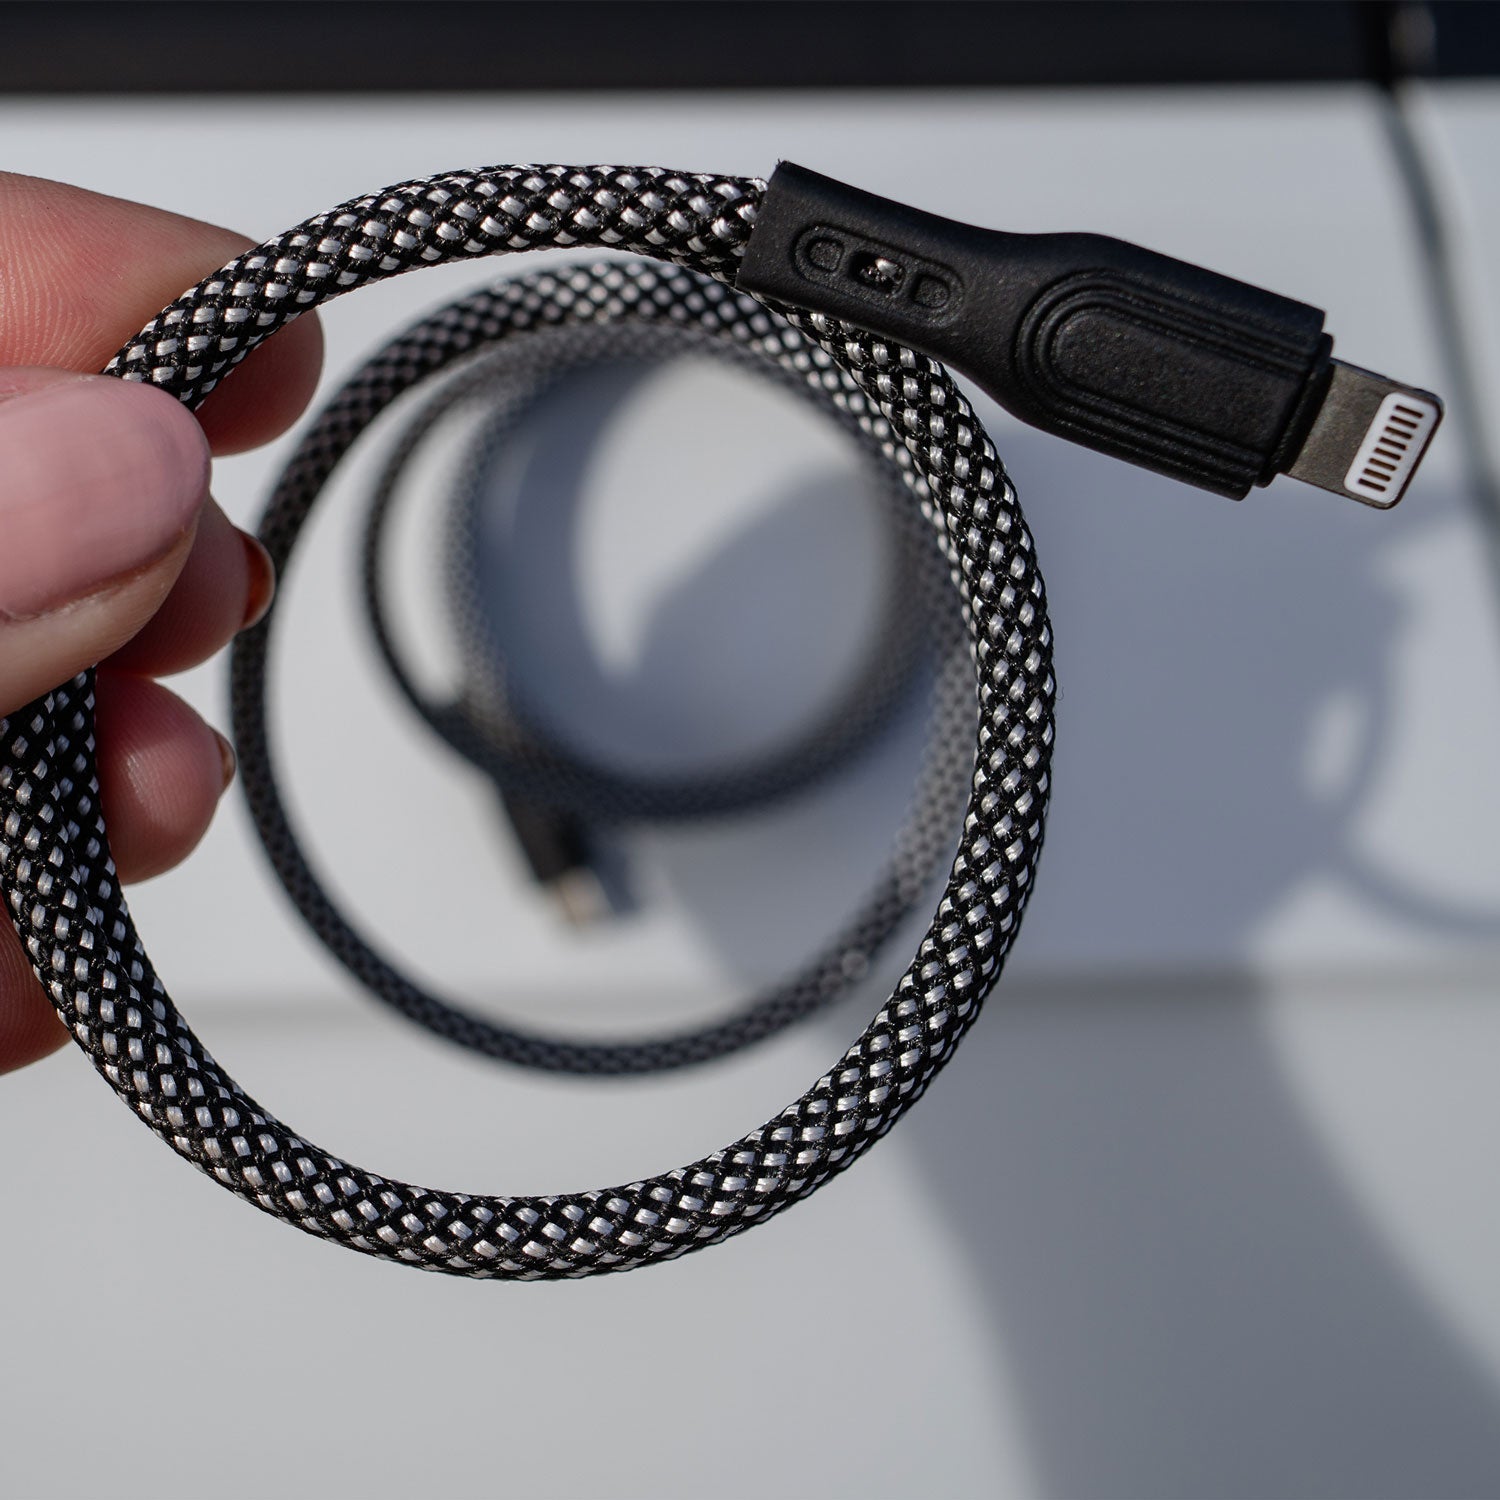 Apple Lightning iPhone cable